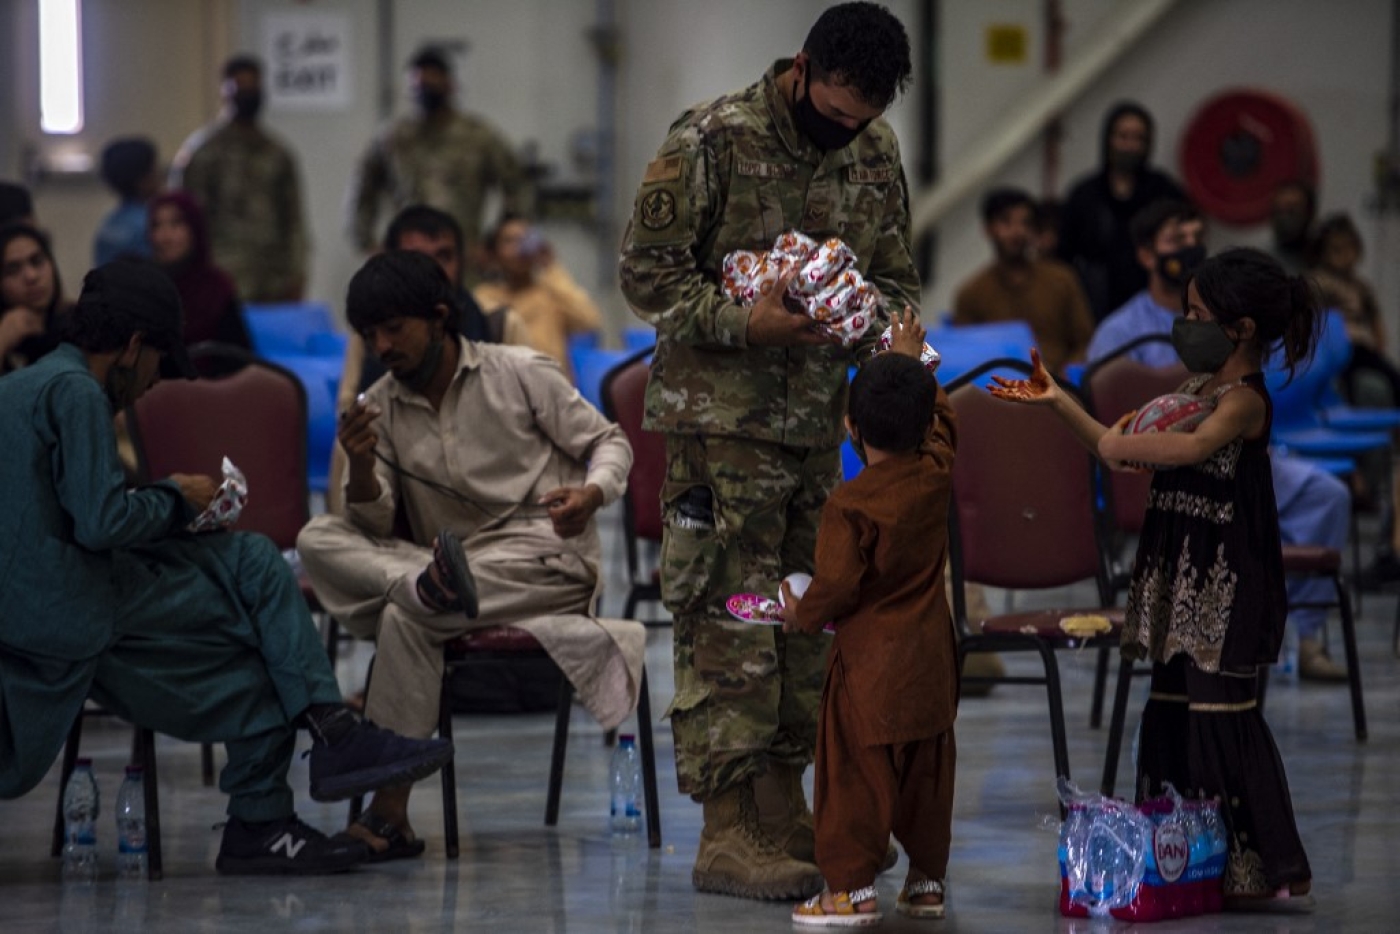 A US soldier distributes food to Afghan citizens on 16 August 2021, at Al Udeid Air Base, Qatar.